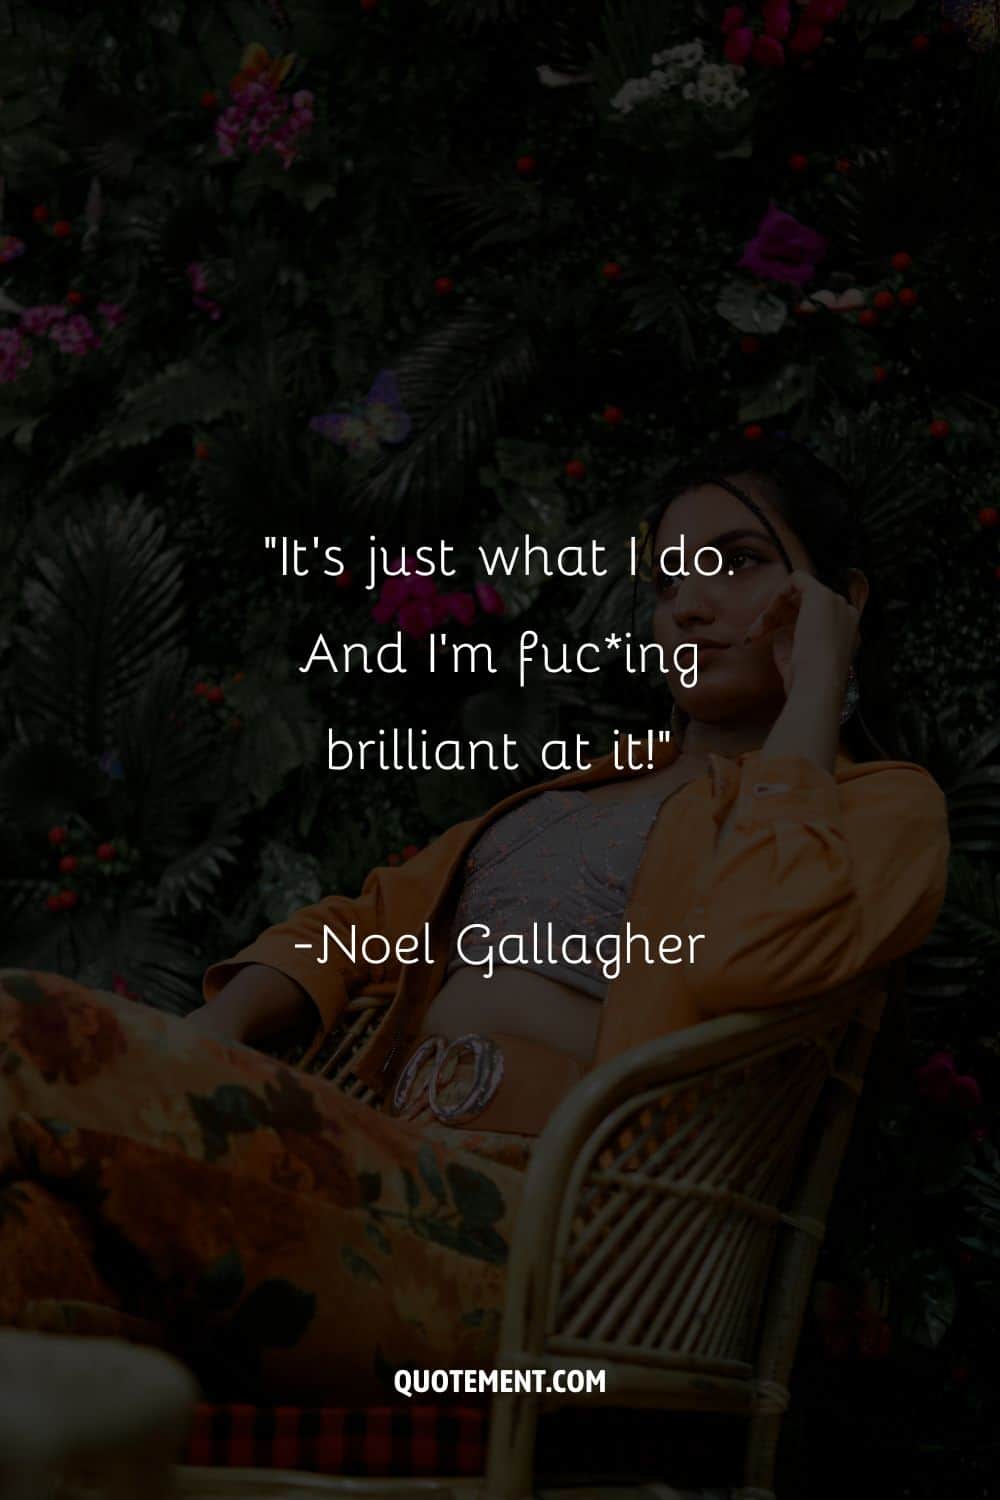 “It’s just what I do. And I’m fucing brilliant at it!” ― Noel Gallagher